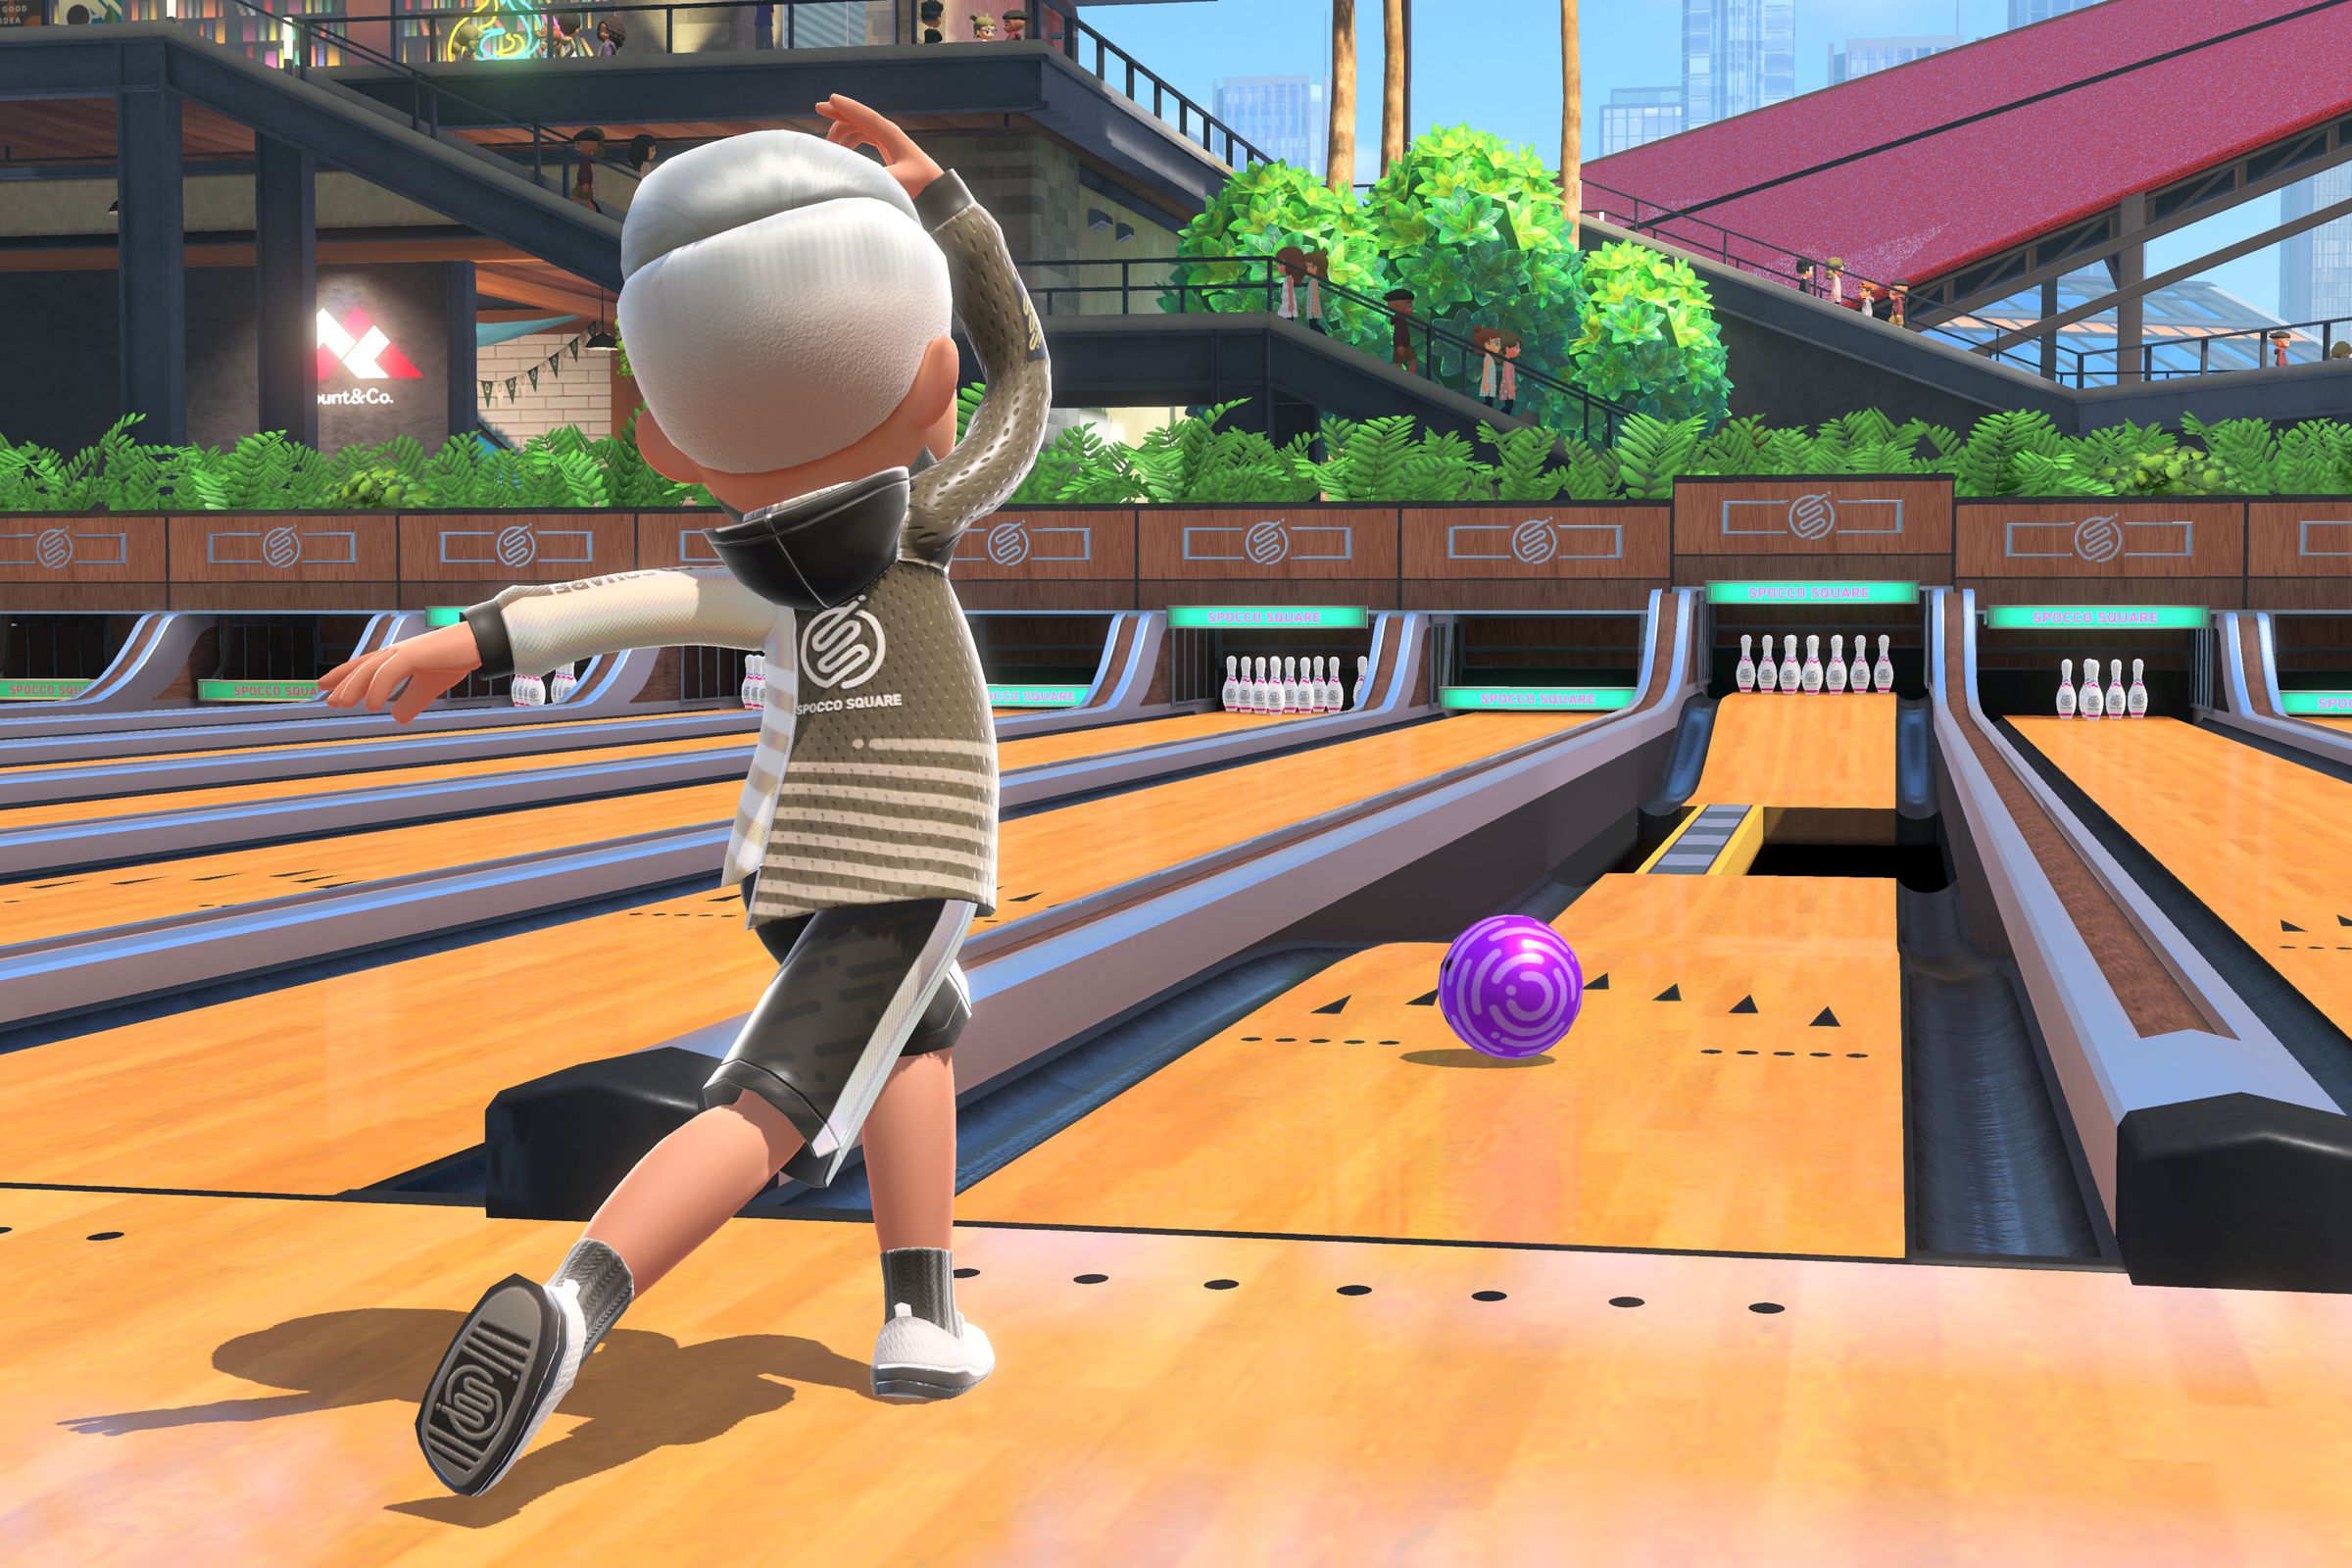 In a screenshot from Nintendo Switch Sports, a bowler tosses the ball down a lane with a narrow path and a ramp.